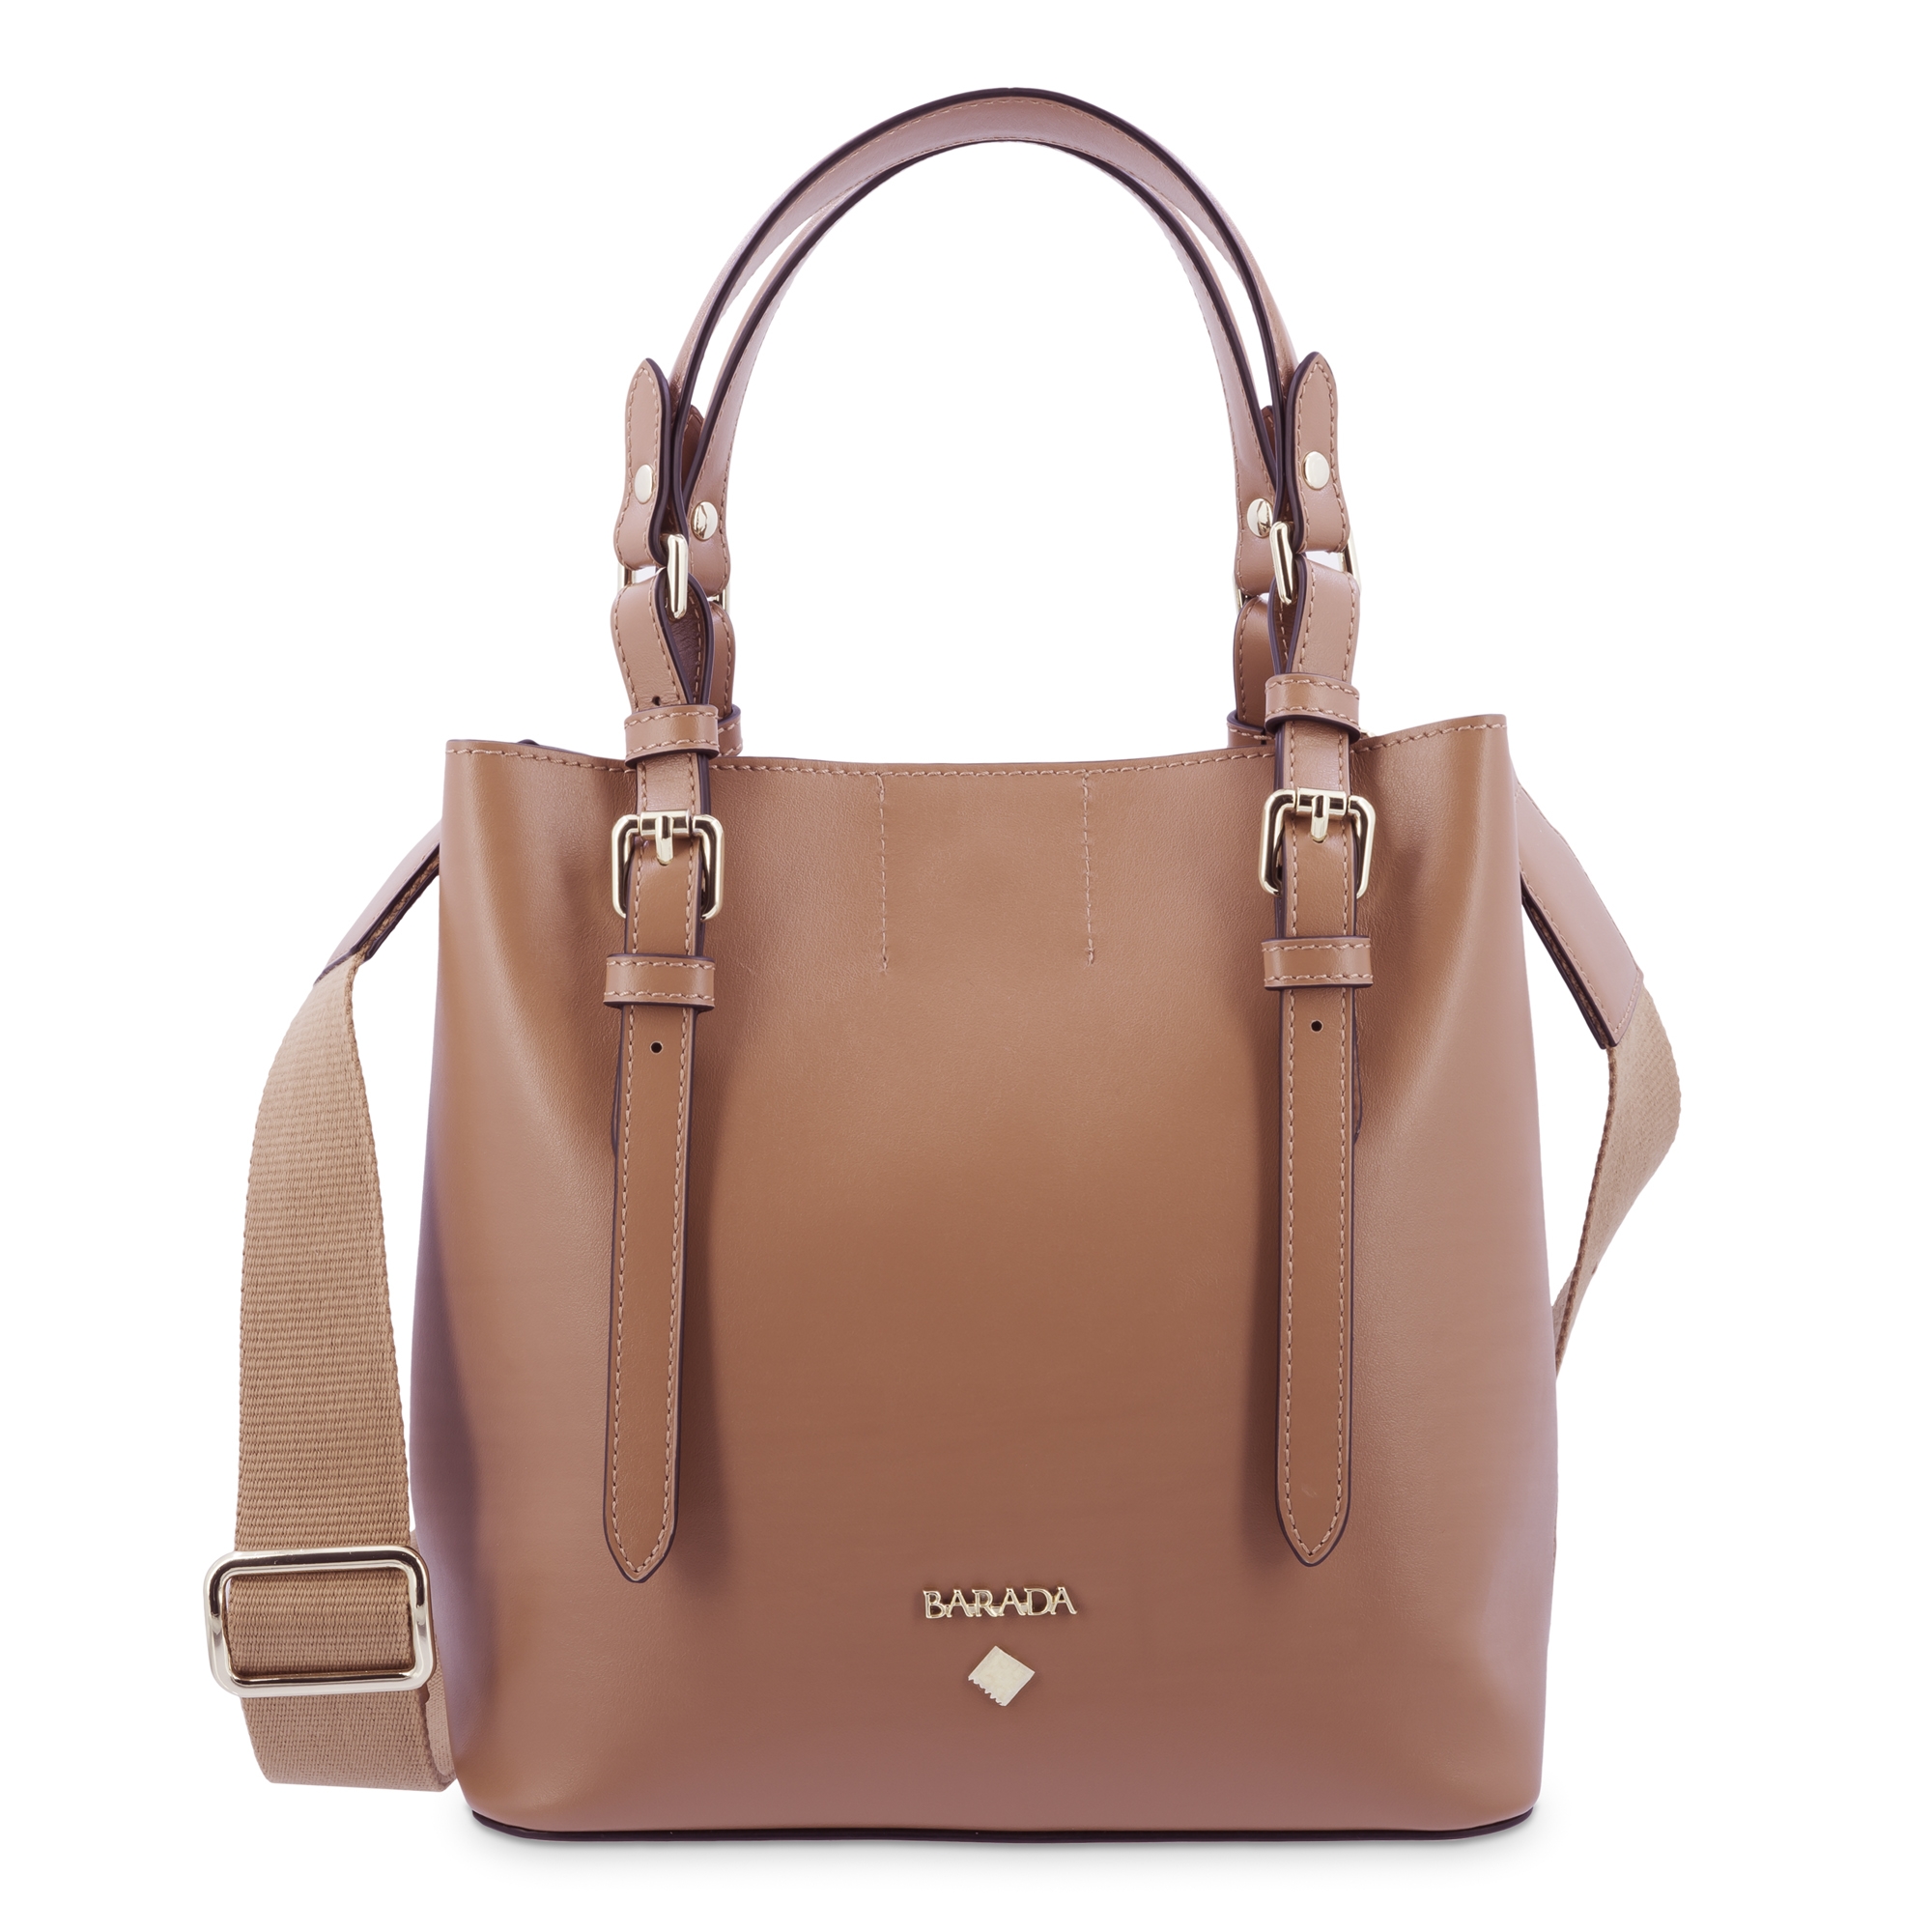 Top Handle Handbag In Cow Leather And, How To Recolor Leather